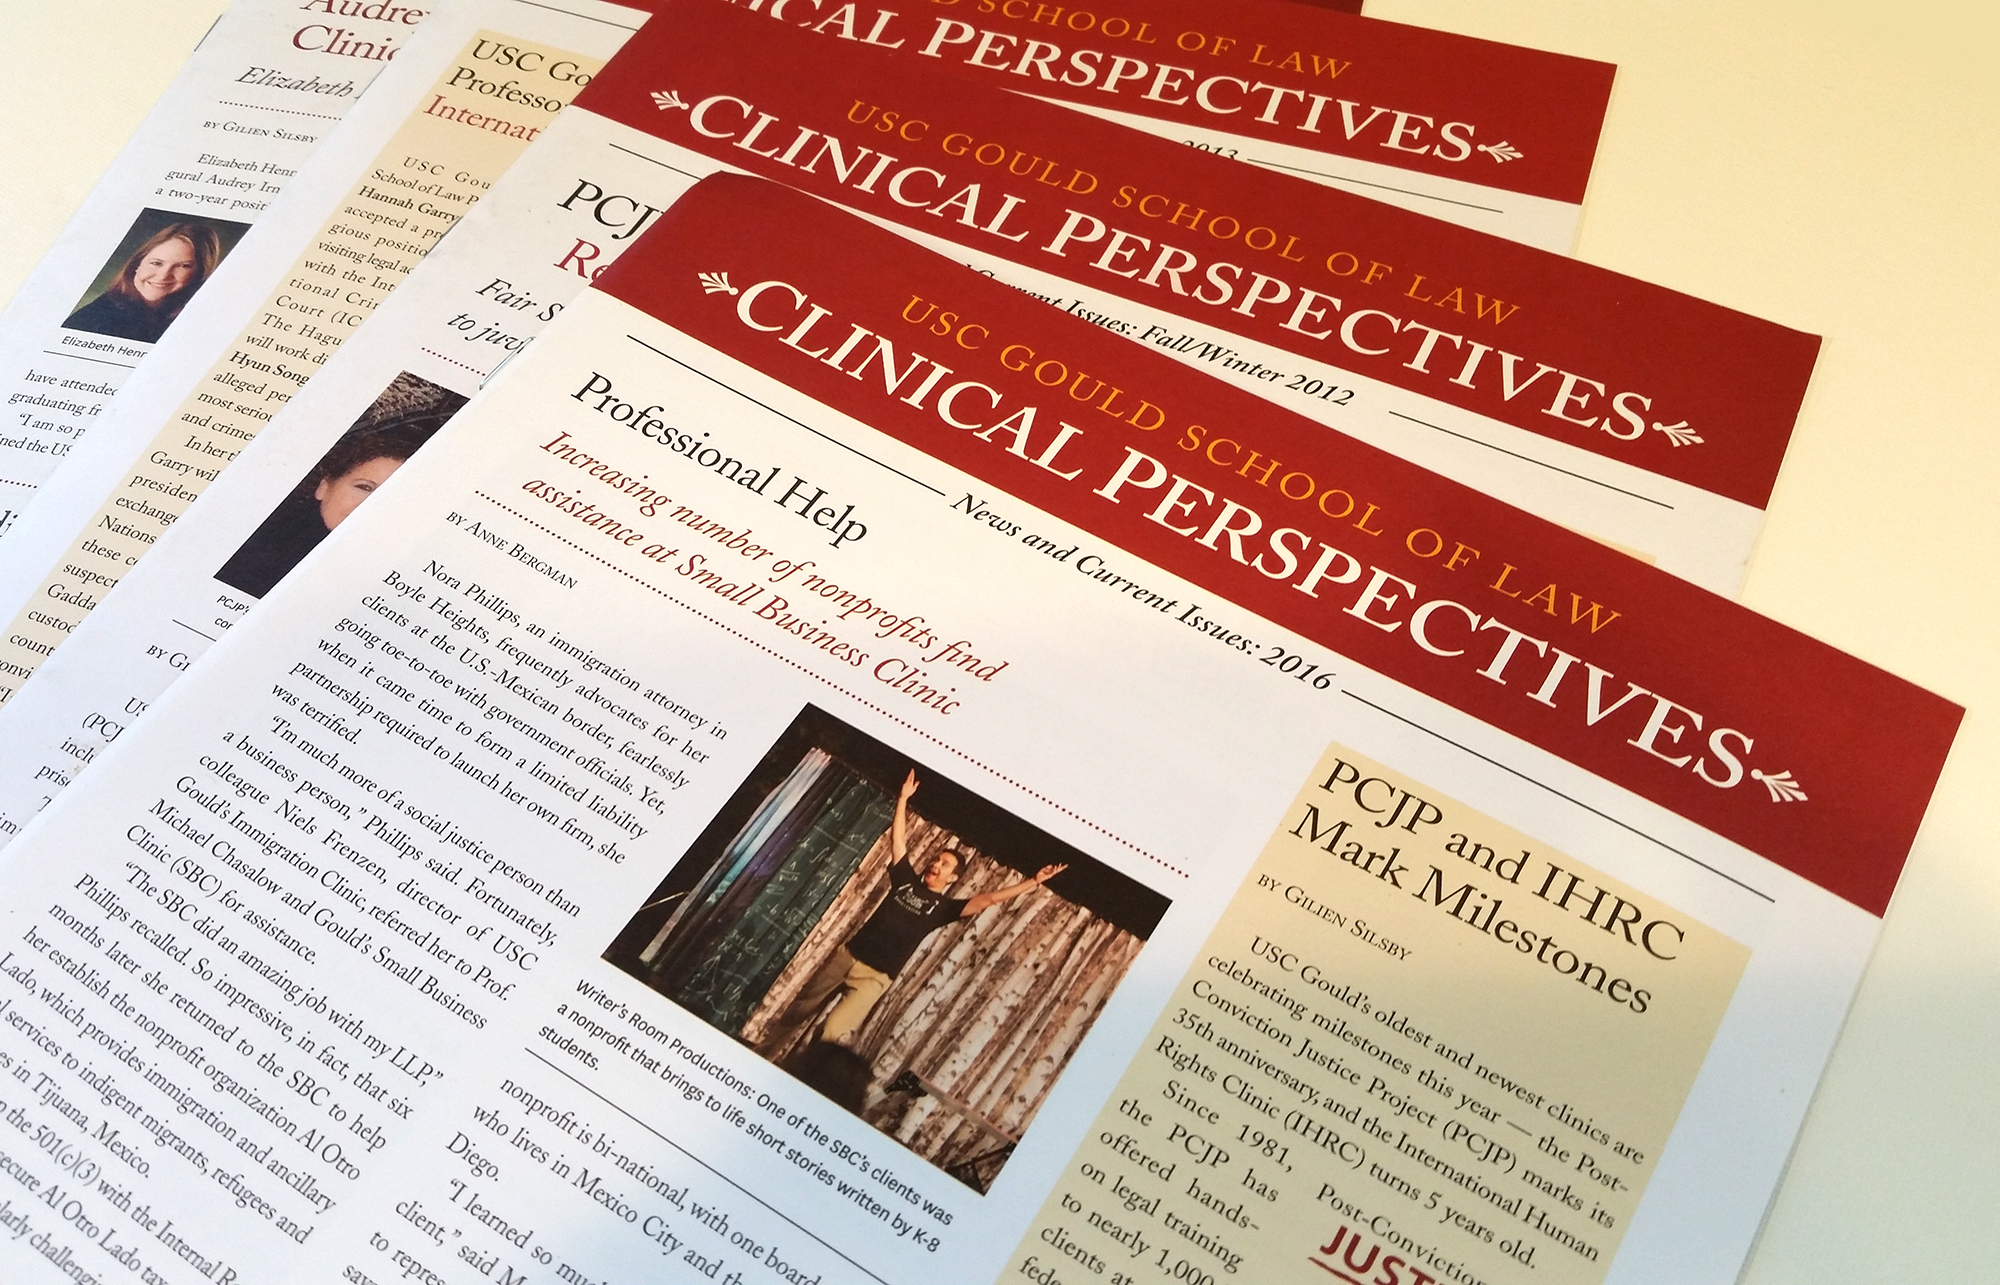 usc-clinical-perspectives-copies